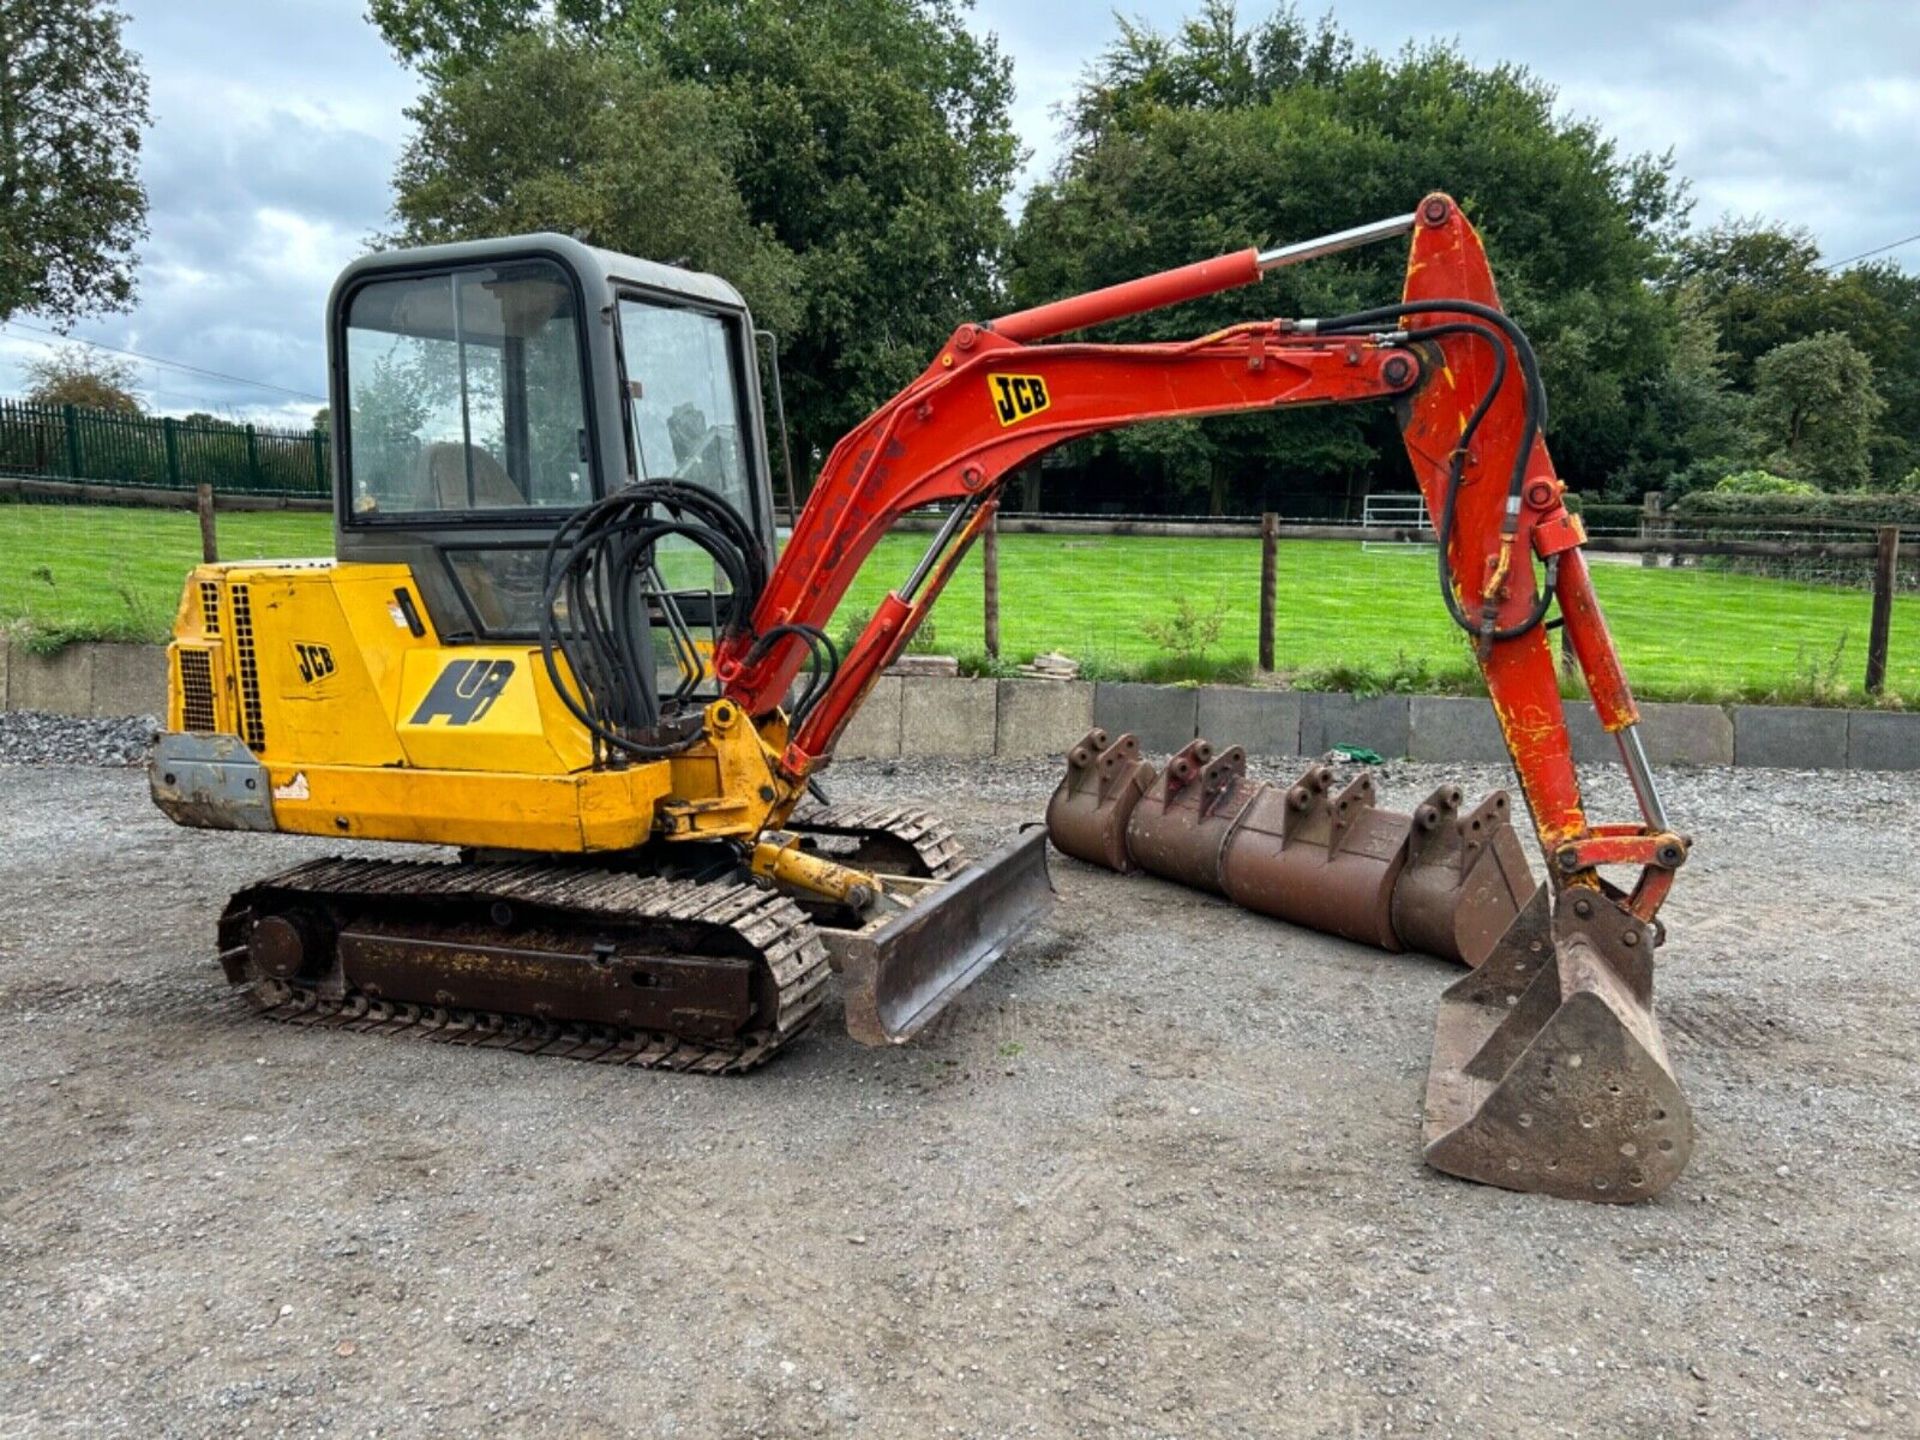 SOLID TRACKS, STRONG DIGGER: 1994 JCB 803 WITH PERKINS ENGINE - Bild 7 aus 14